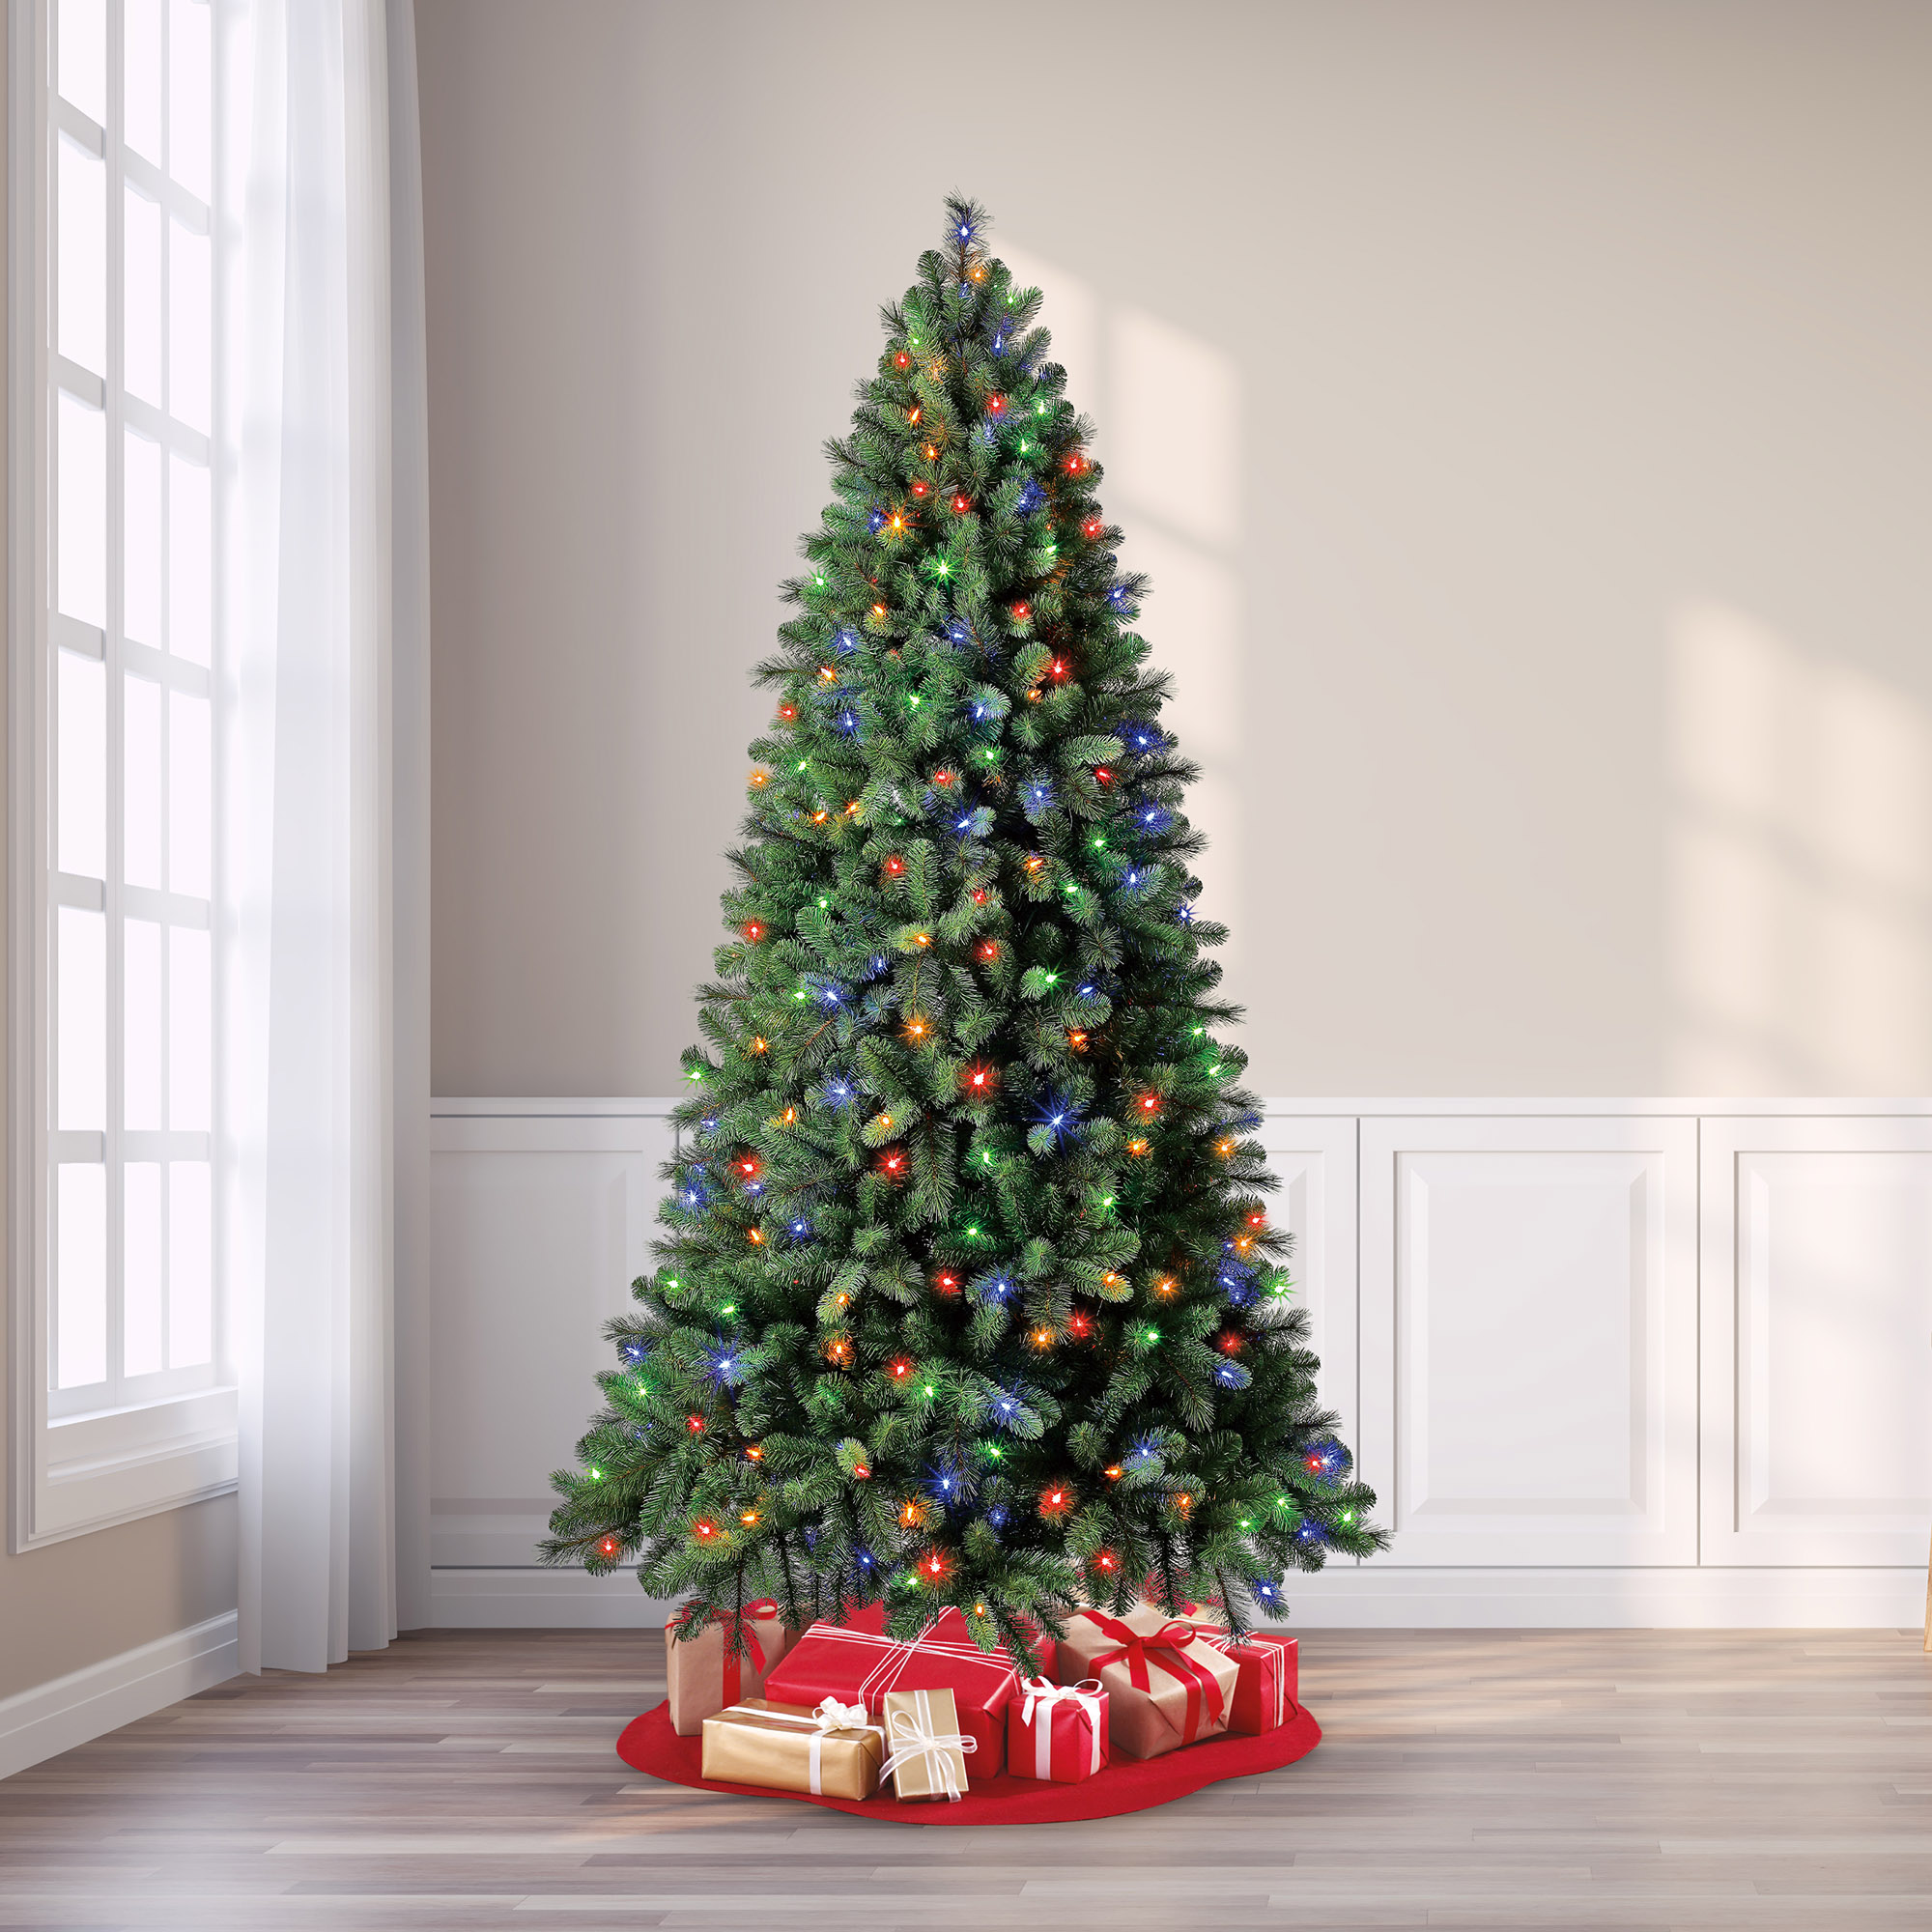 Holiday Time Multi-color Prelit LED Green Decorated Spruce Artificial Christmas Tree, with Color Changing Lights 7.5' - image 3 of 8